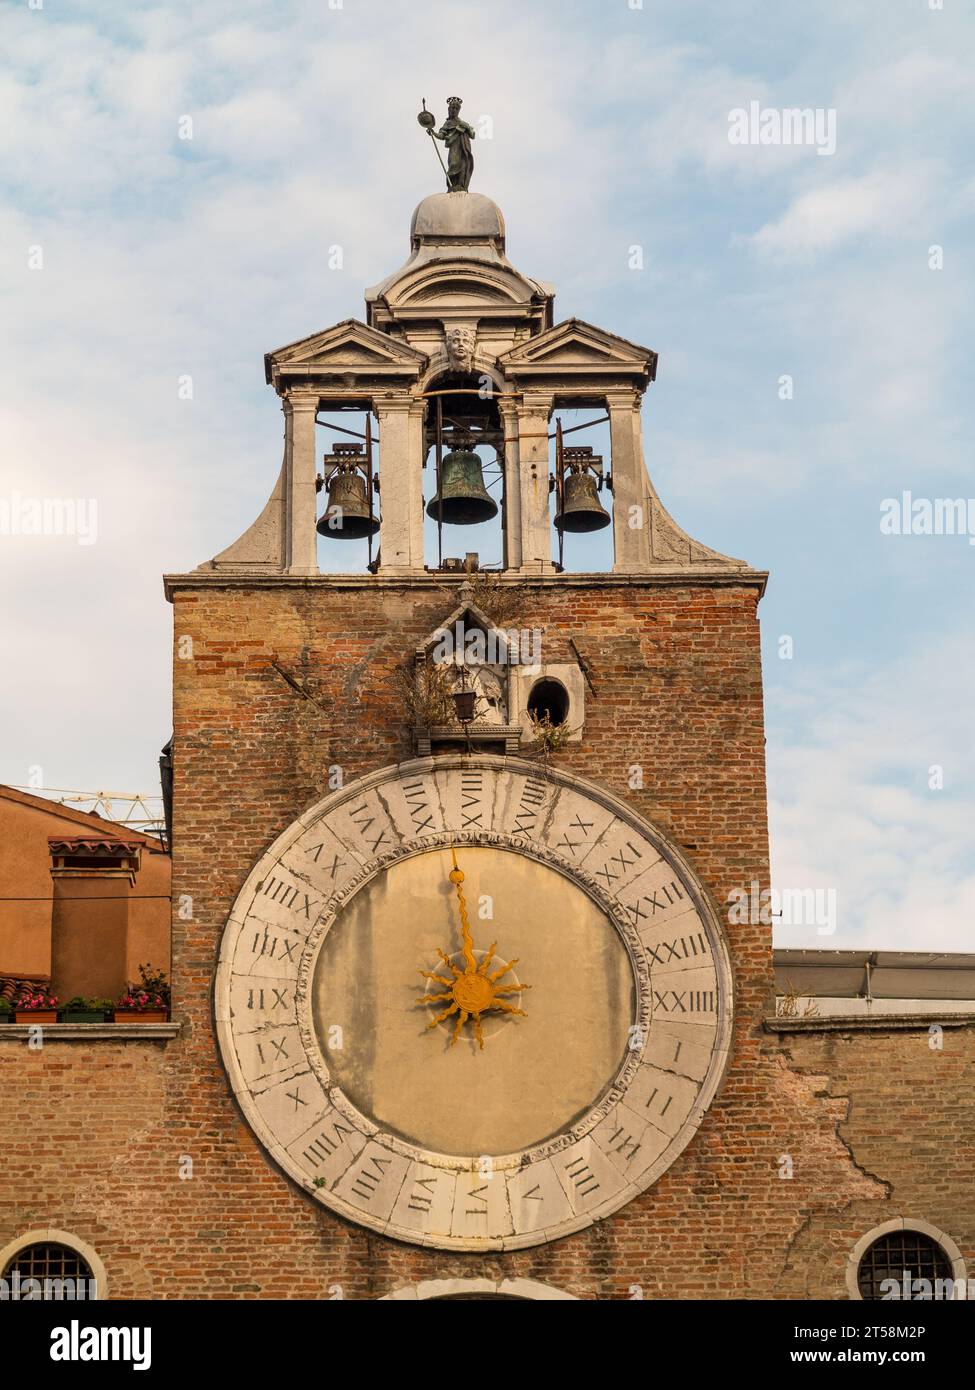 Bell tower of a church with three bells, decorated with a clock with Roman numerals in Venice, Italy. Stock Photo